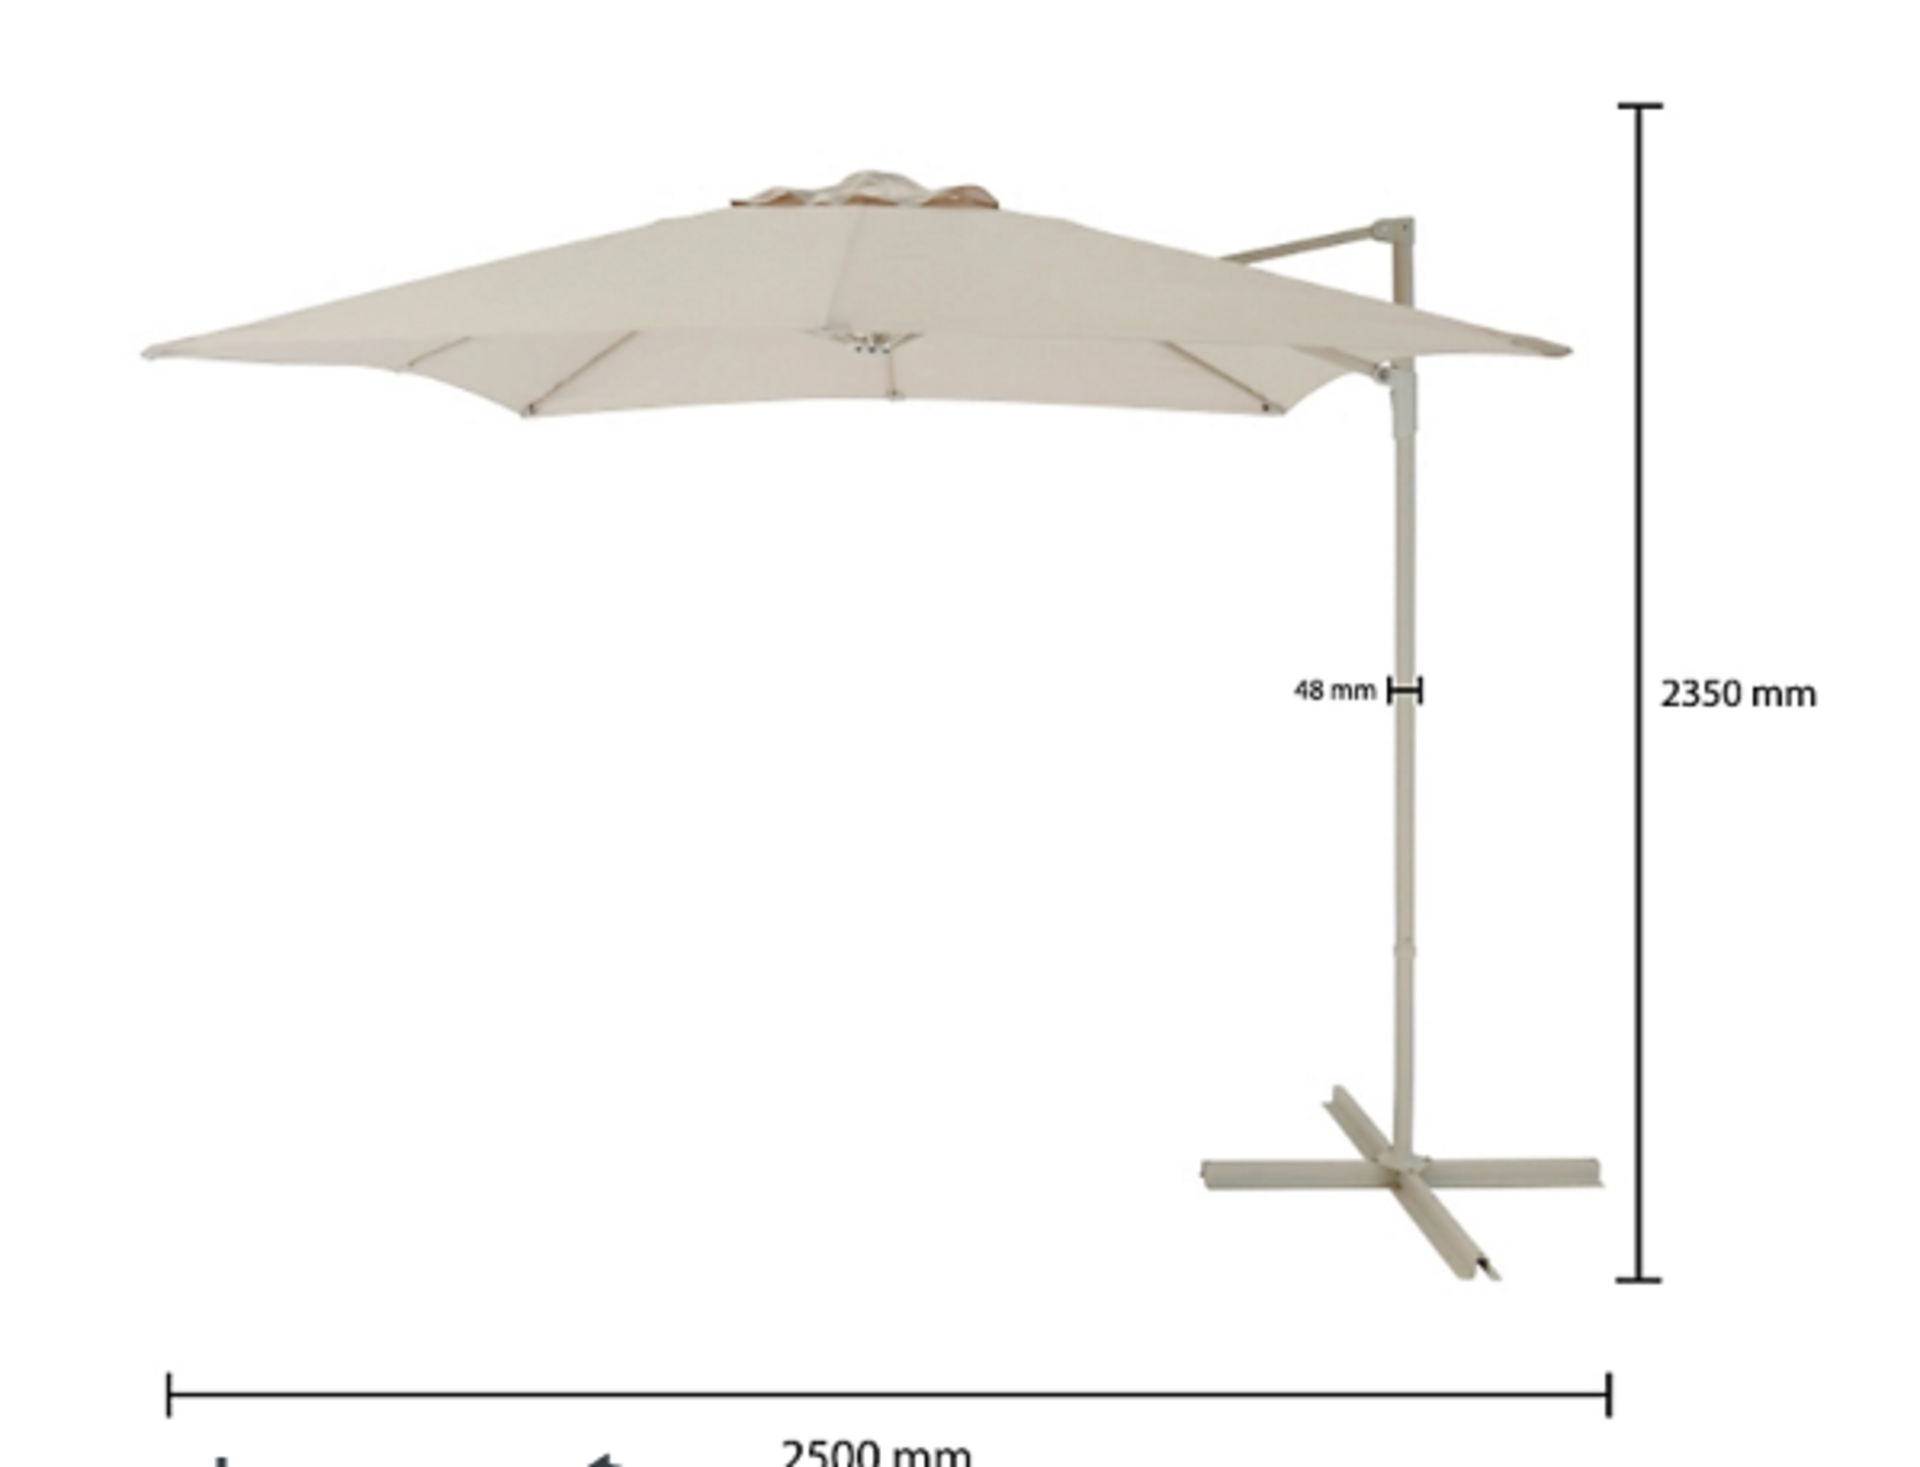 New & Boxed Luxury 2.5m Sand Overhanging Parasol- Sand. This square overhanging parasol provides - Image 8 of 8